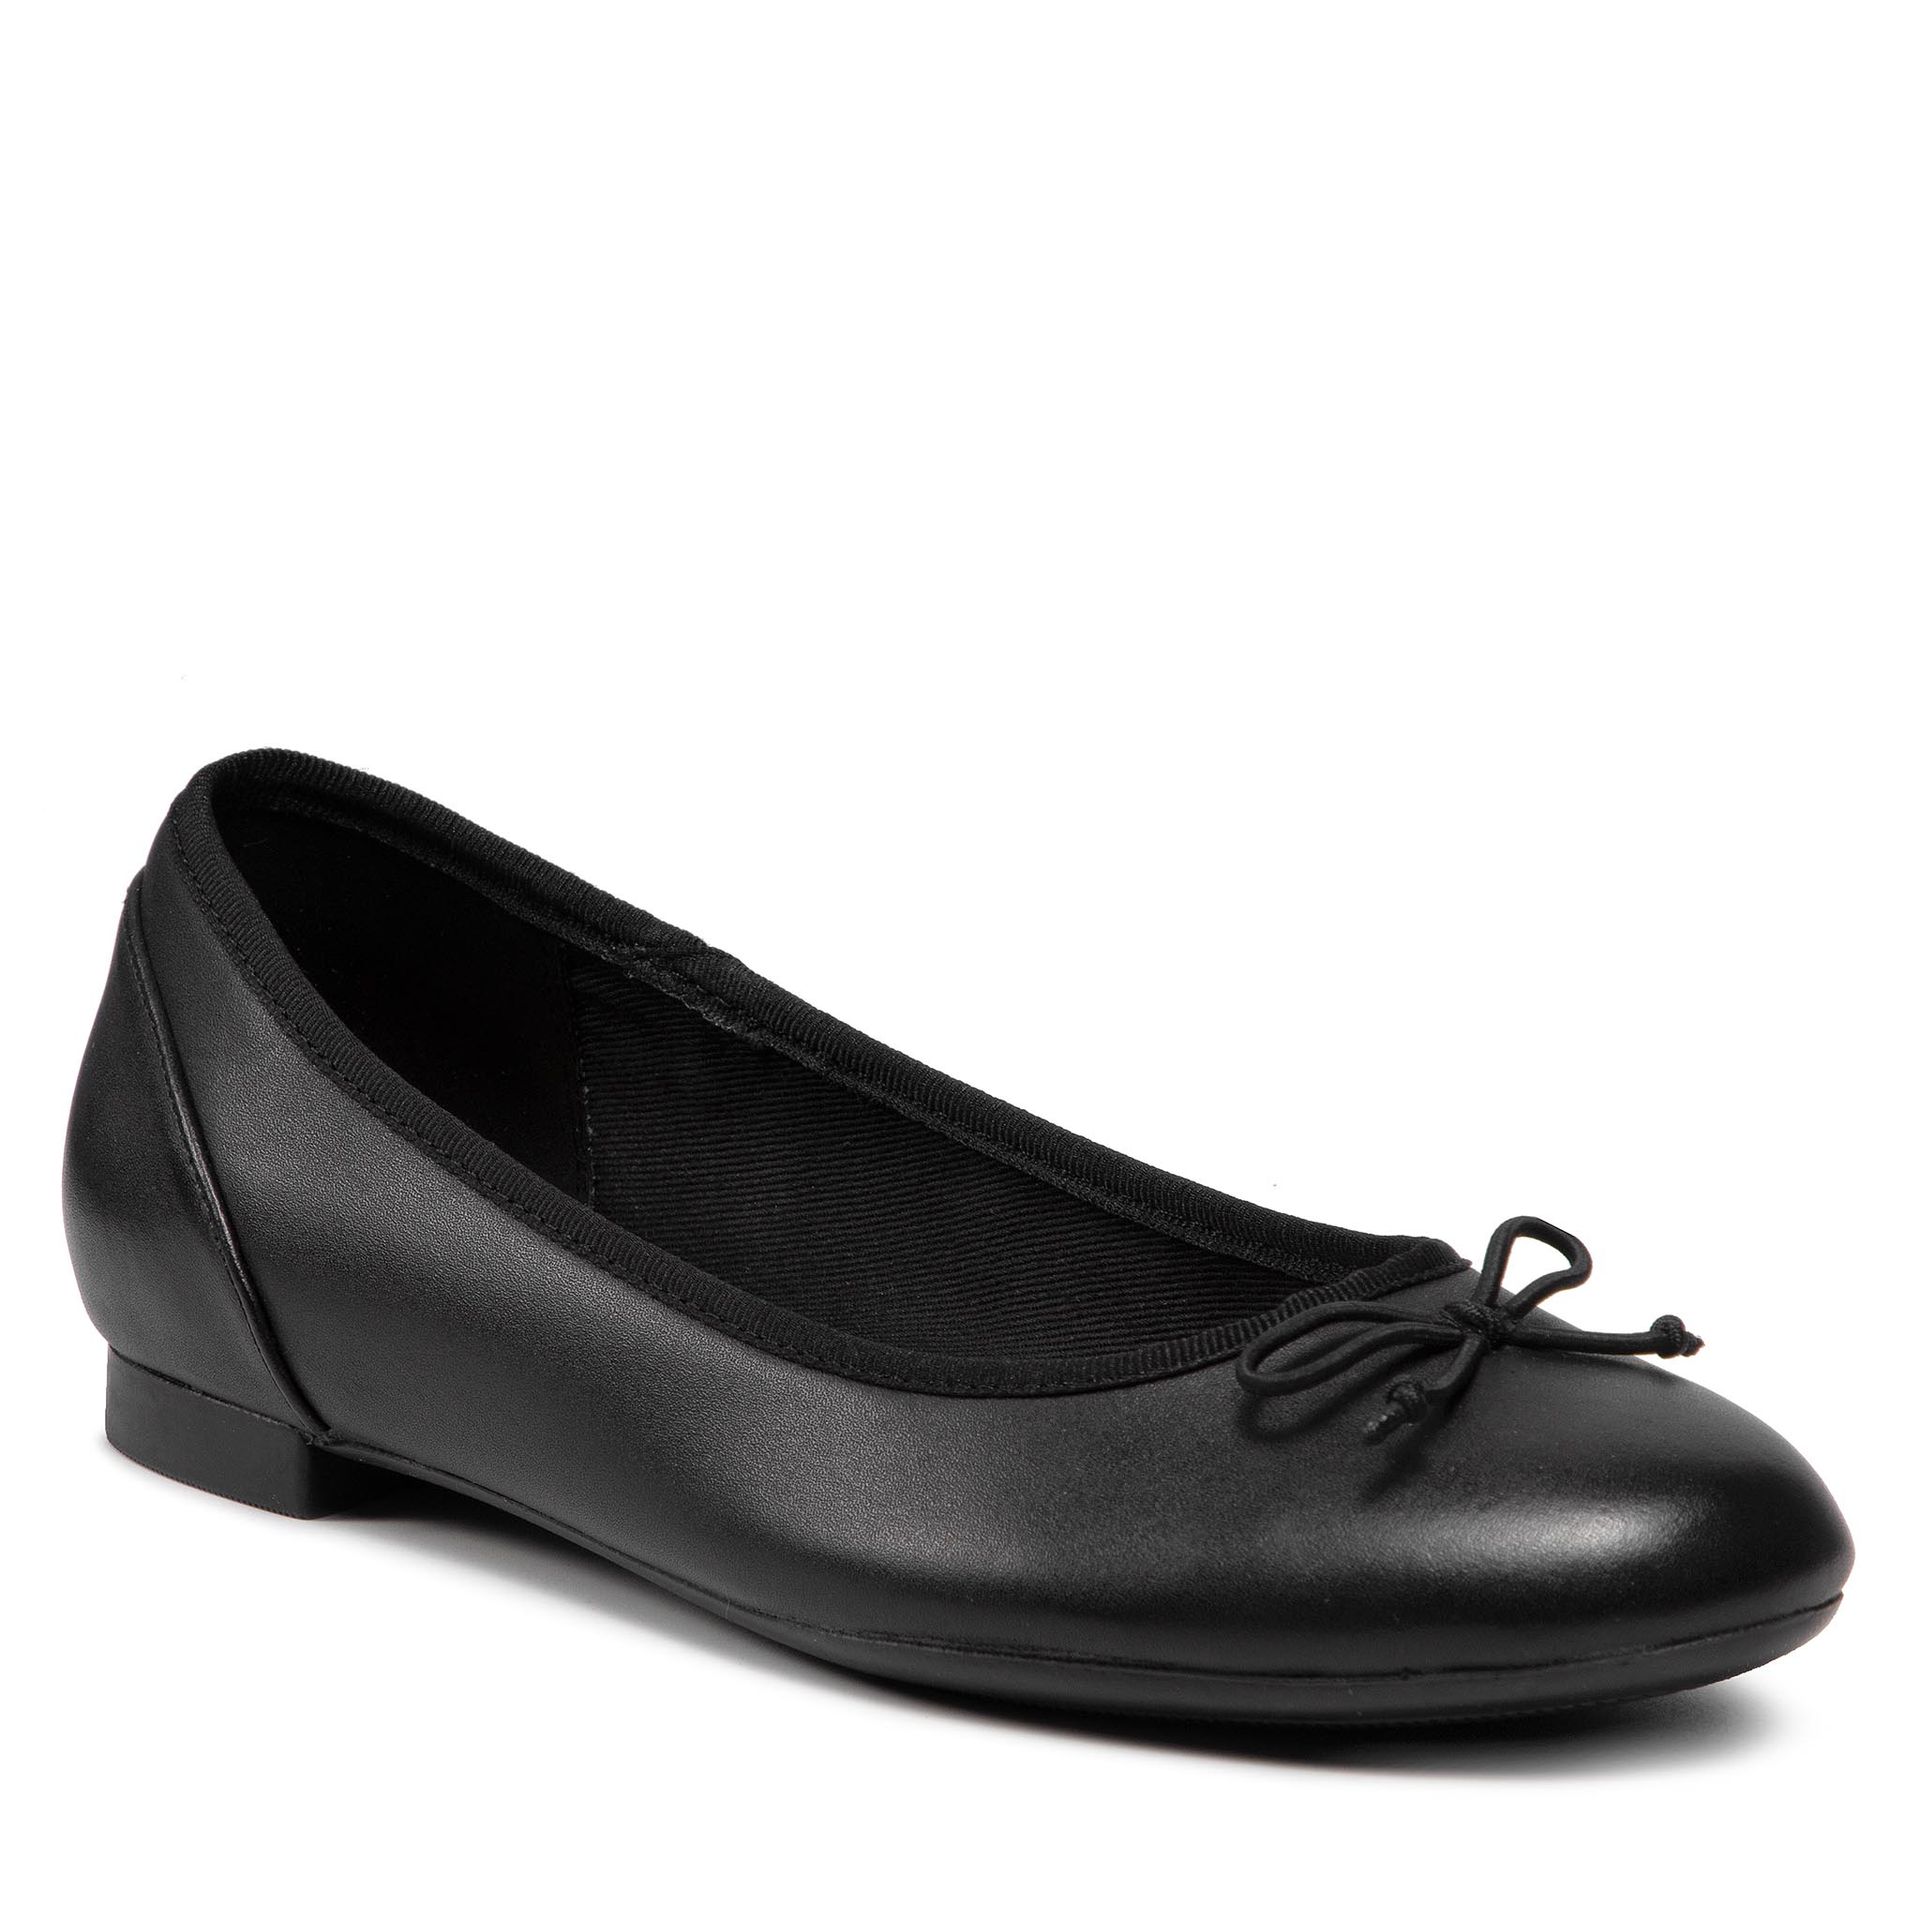 Clarks Baleriny Couture Bloom 261154854 Black Leather